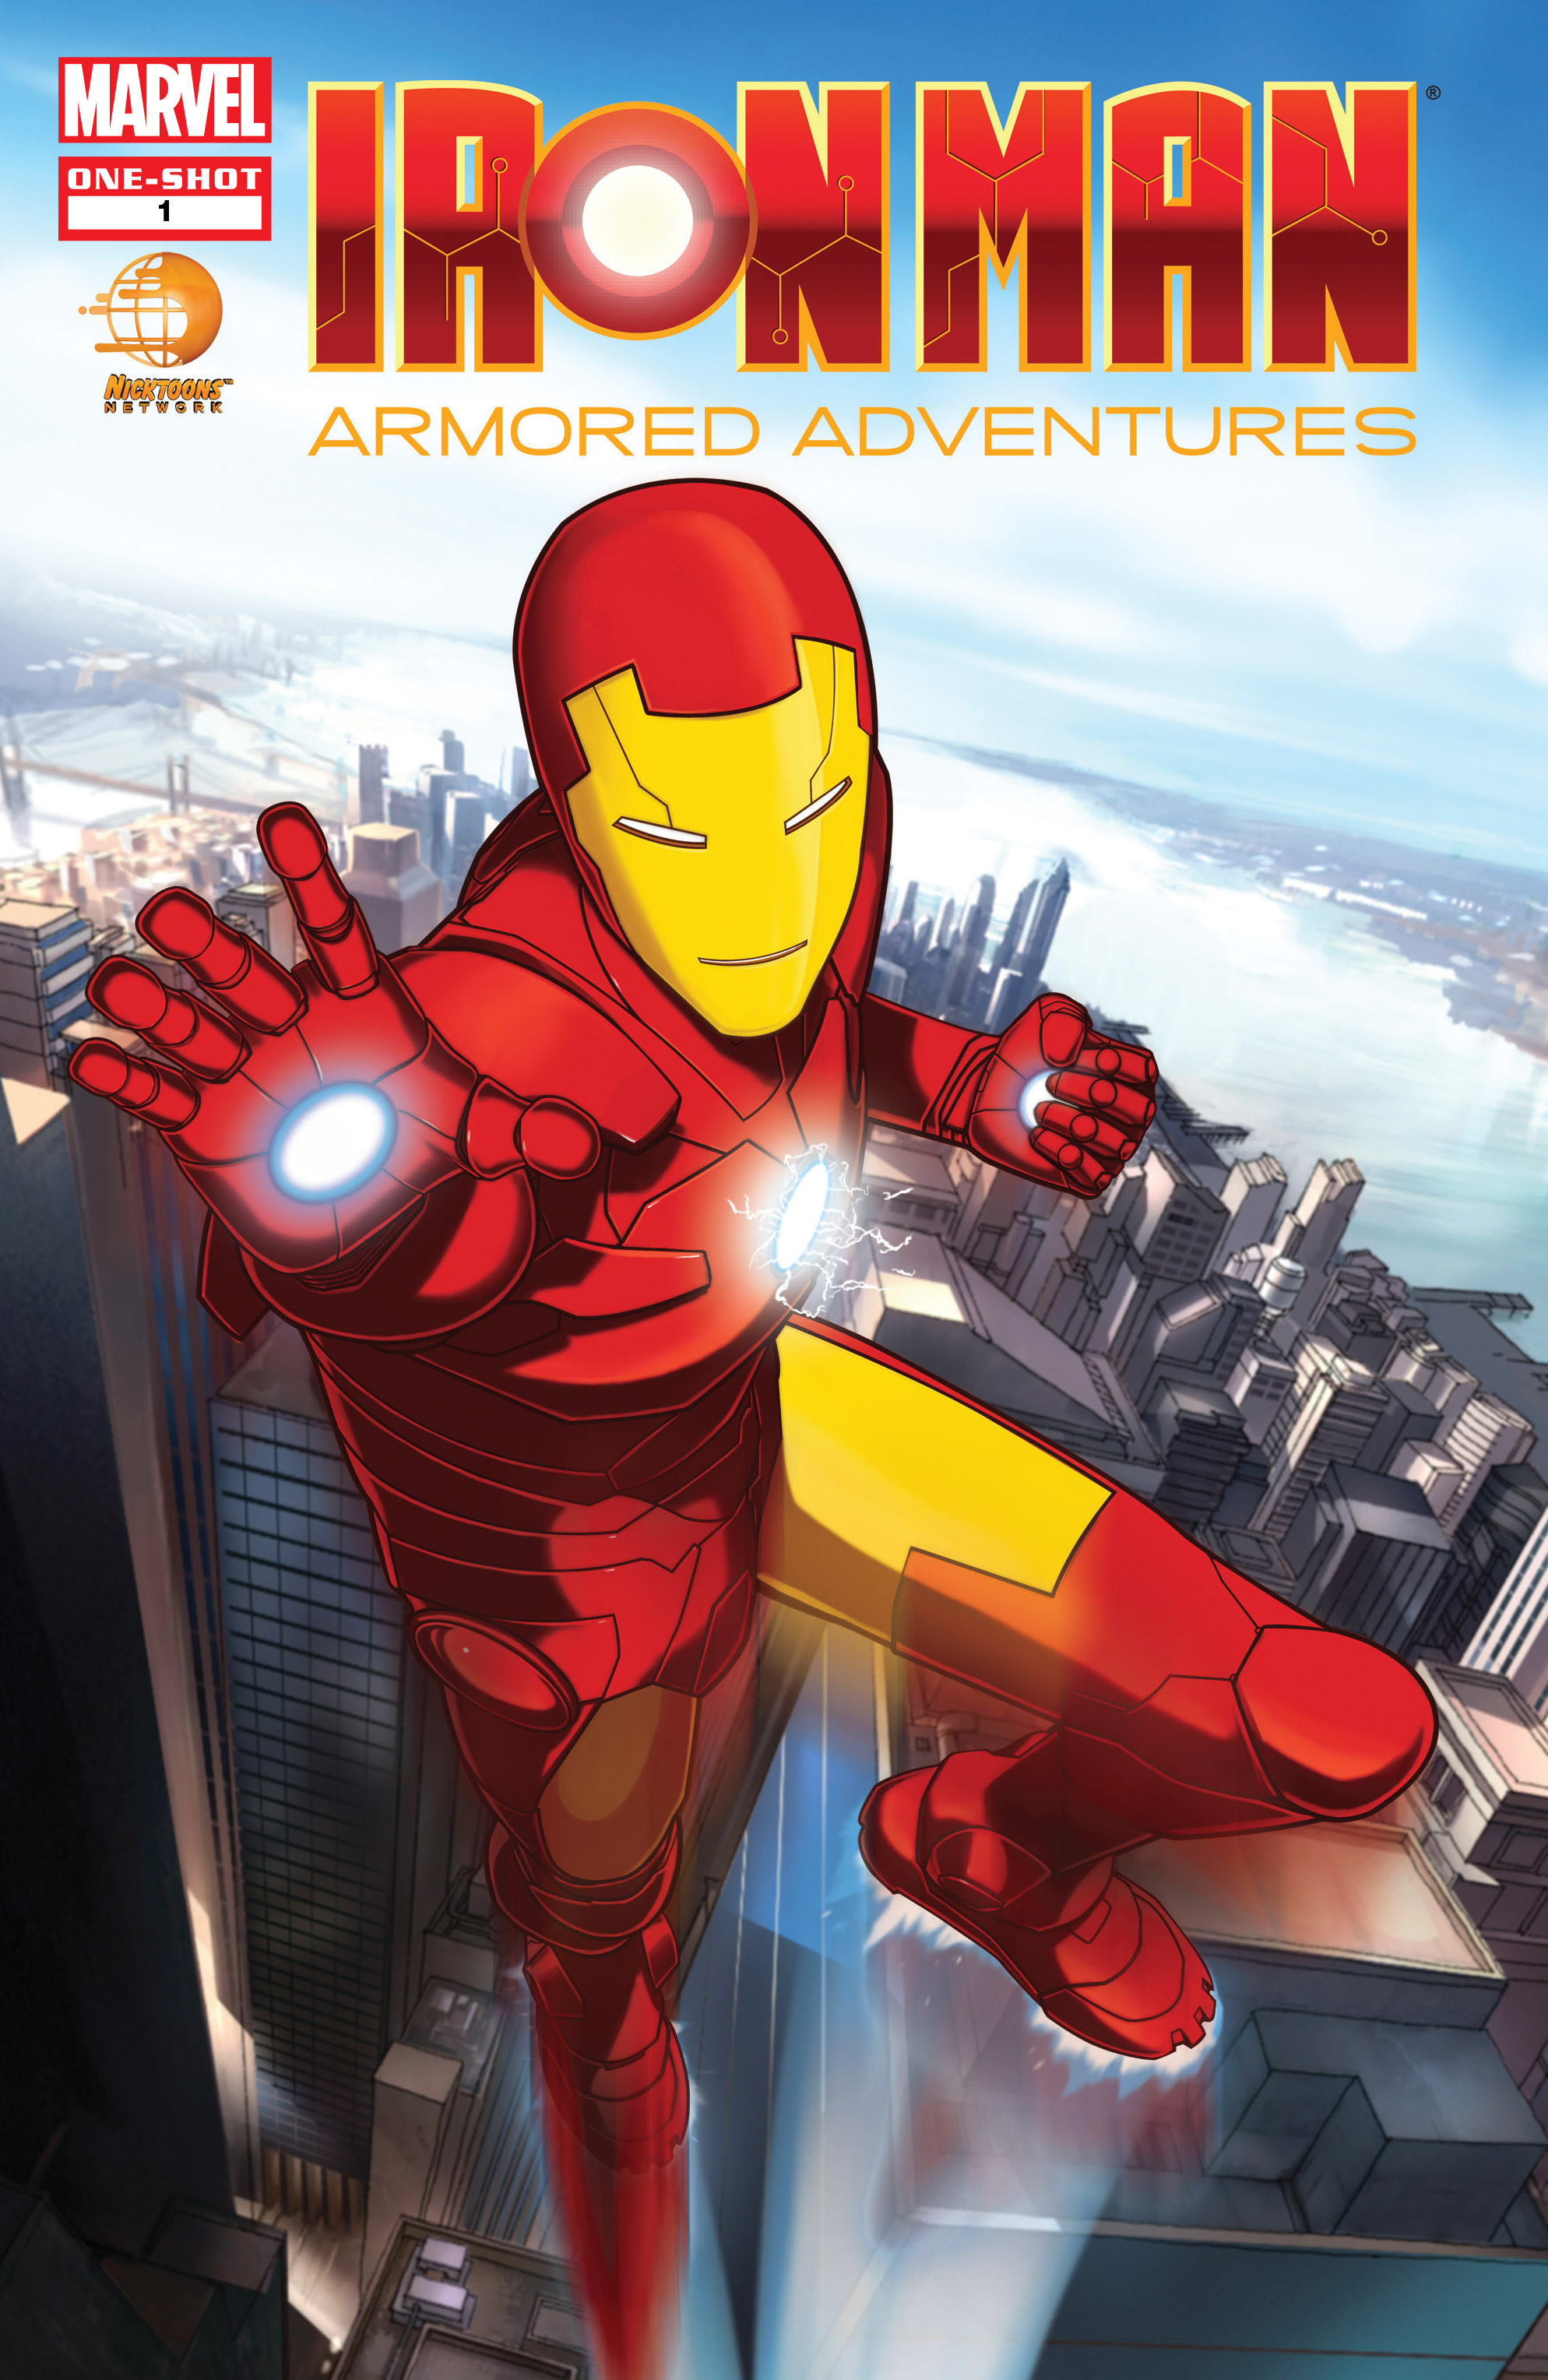 Read online Iron Man: Armored Adventures comic -  Issue # Full - 1